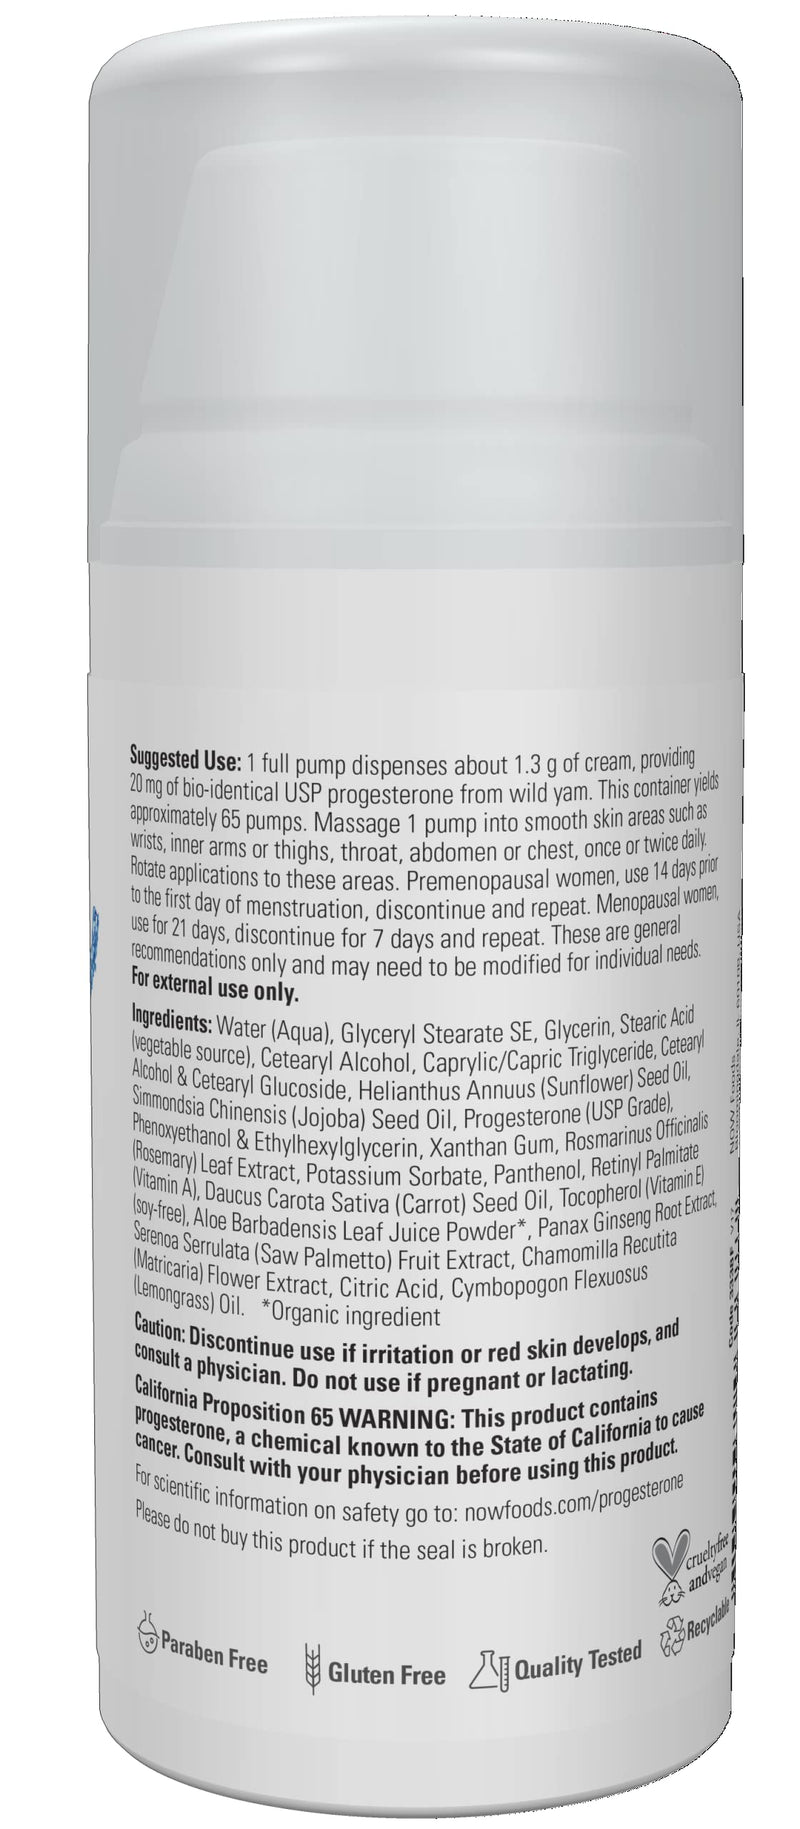 [Australia] - NOW Solutions, Natural Progesterone, Balancing Skin Cream, 20 mg of Natural Progesterone Per Pump, Unscented, 3-Ounce Unscented 